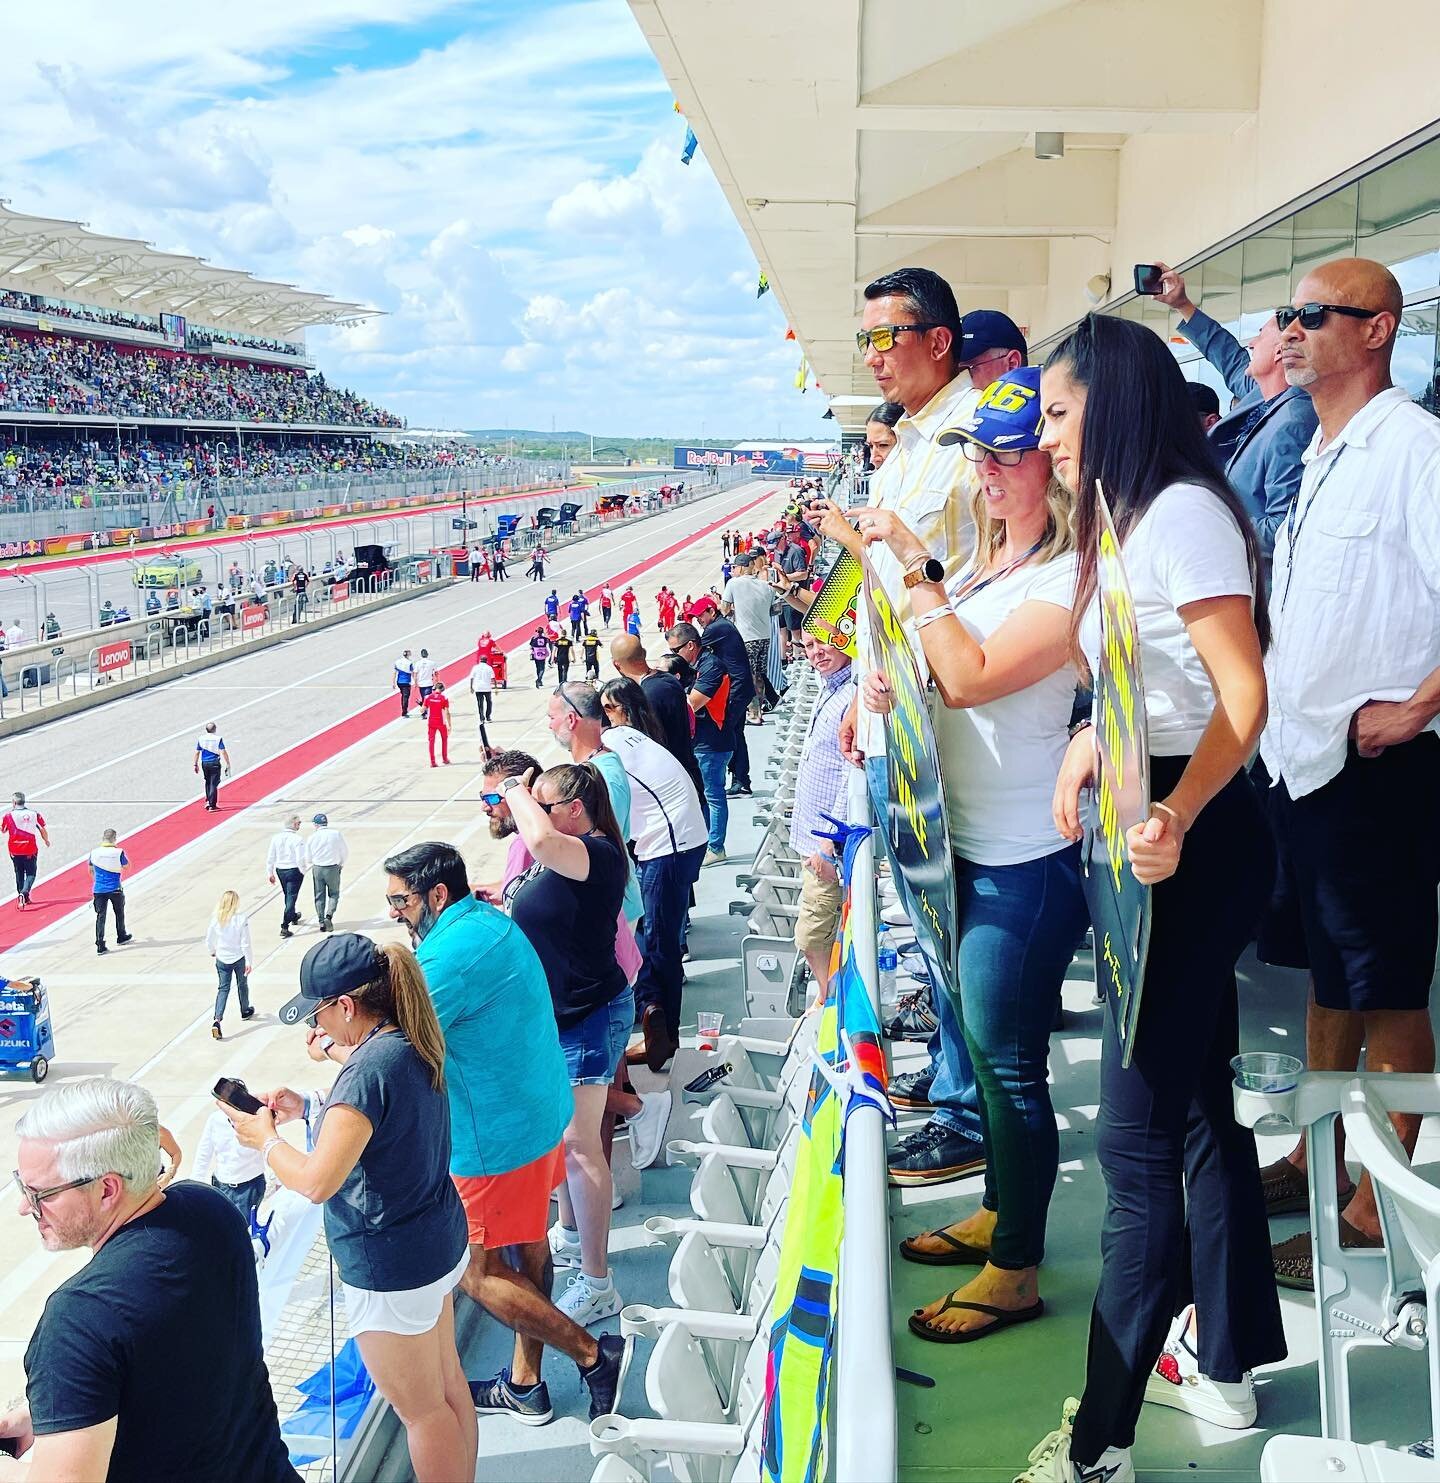 Are you ready to hear the thunder and feel the action of the #americasgp ‼️❓We are 😎
&bull;
&bull;
&bull;
#motogp #cota #suite #vip #nonprofit #community #charity #fundraiser #fundraising #veteran #military #veterans #support #motorcycle #race #raci